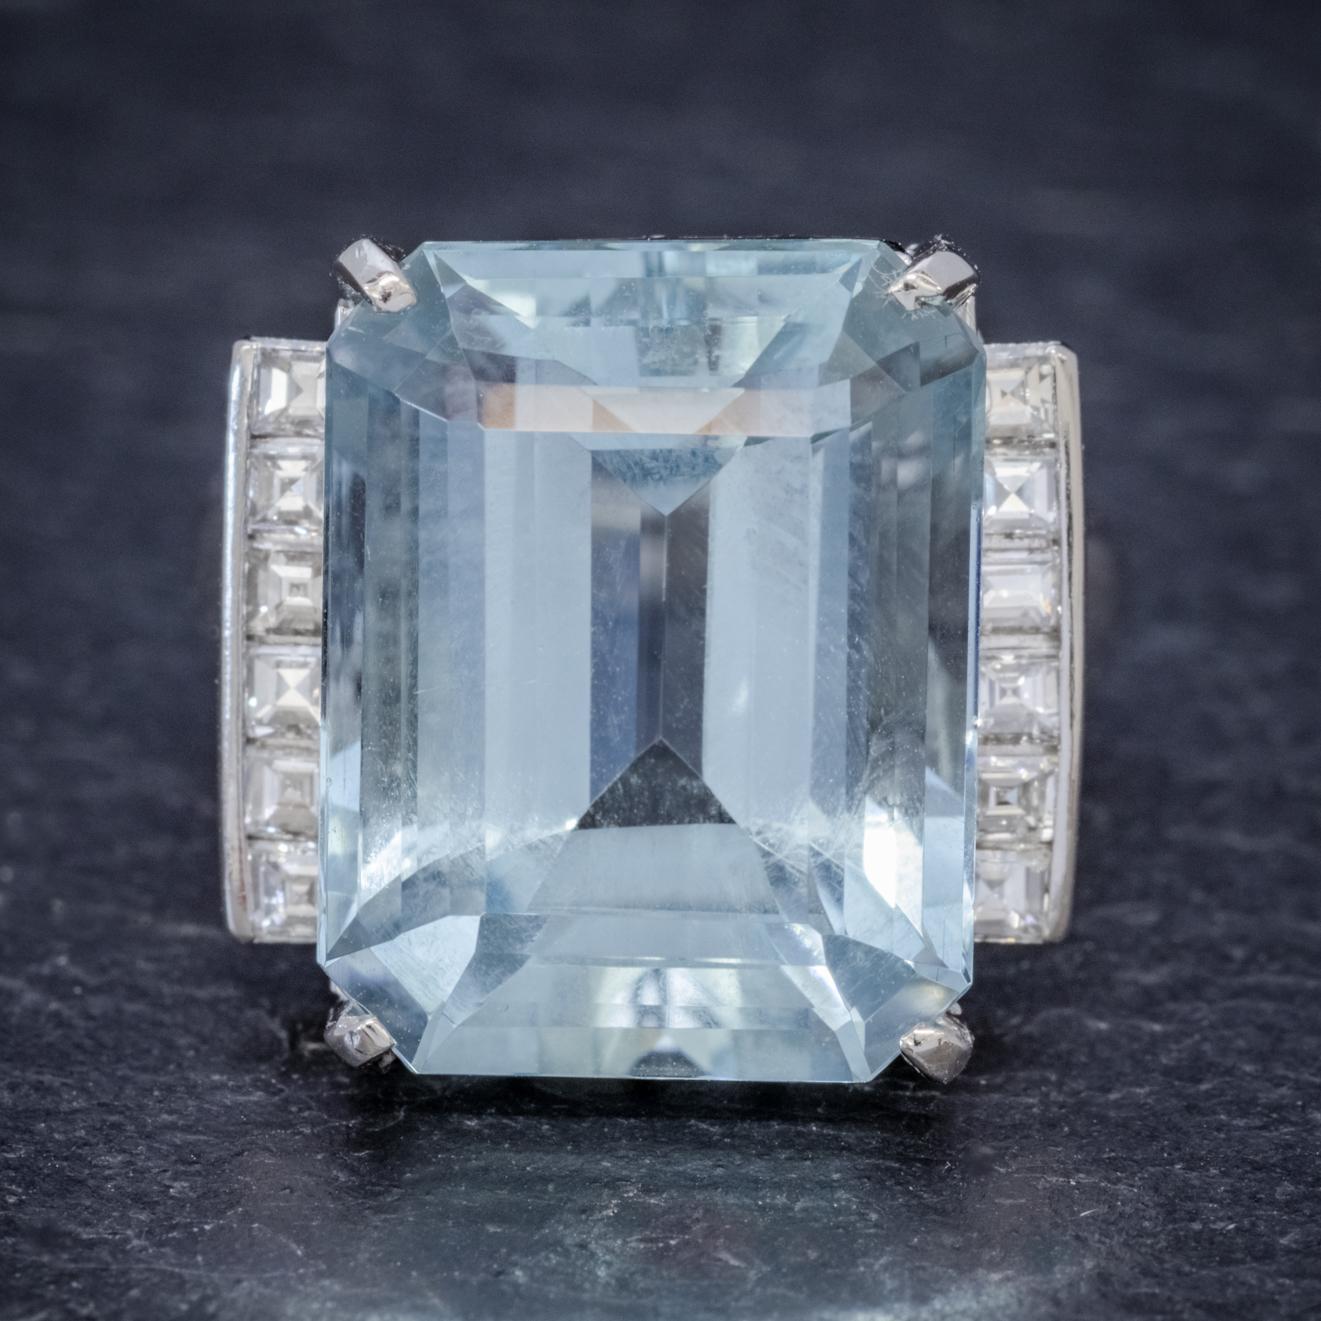 A magnificent Art Deco cocktail ring set with a breath-taking emerald cut Aquamarine which is a lovely clear ocean blue colour weighing approx. 12ct and flanked with a row of six square cut Diamonds down each side. 

The Diamonds are clean, bright